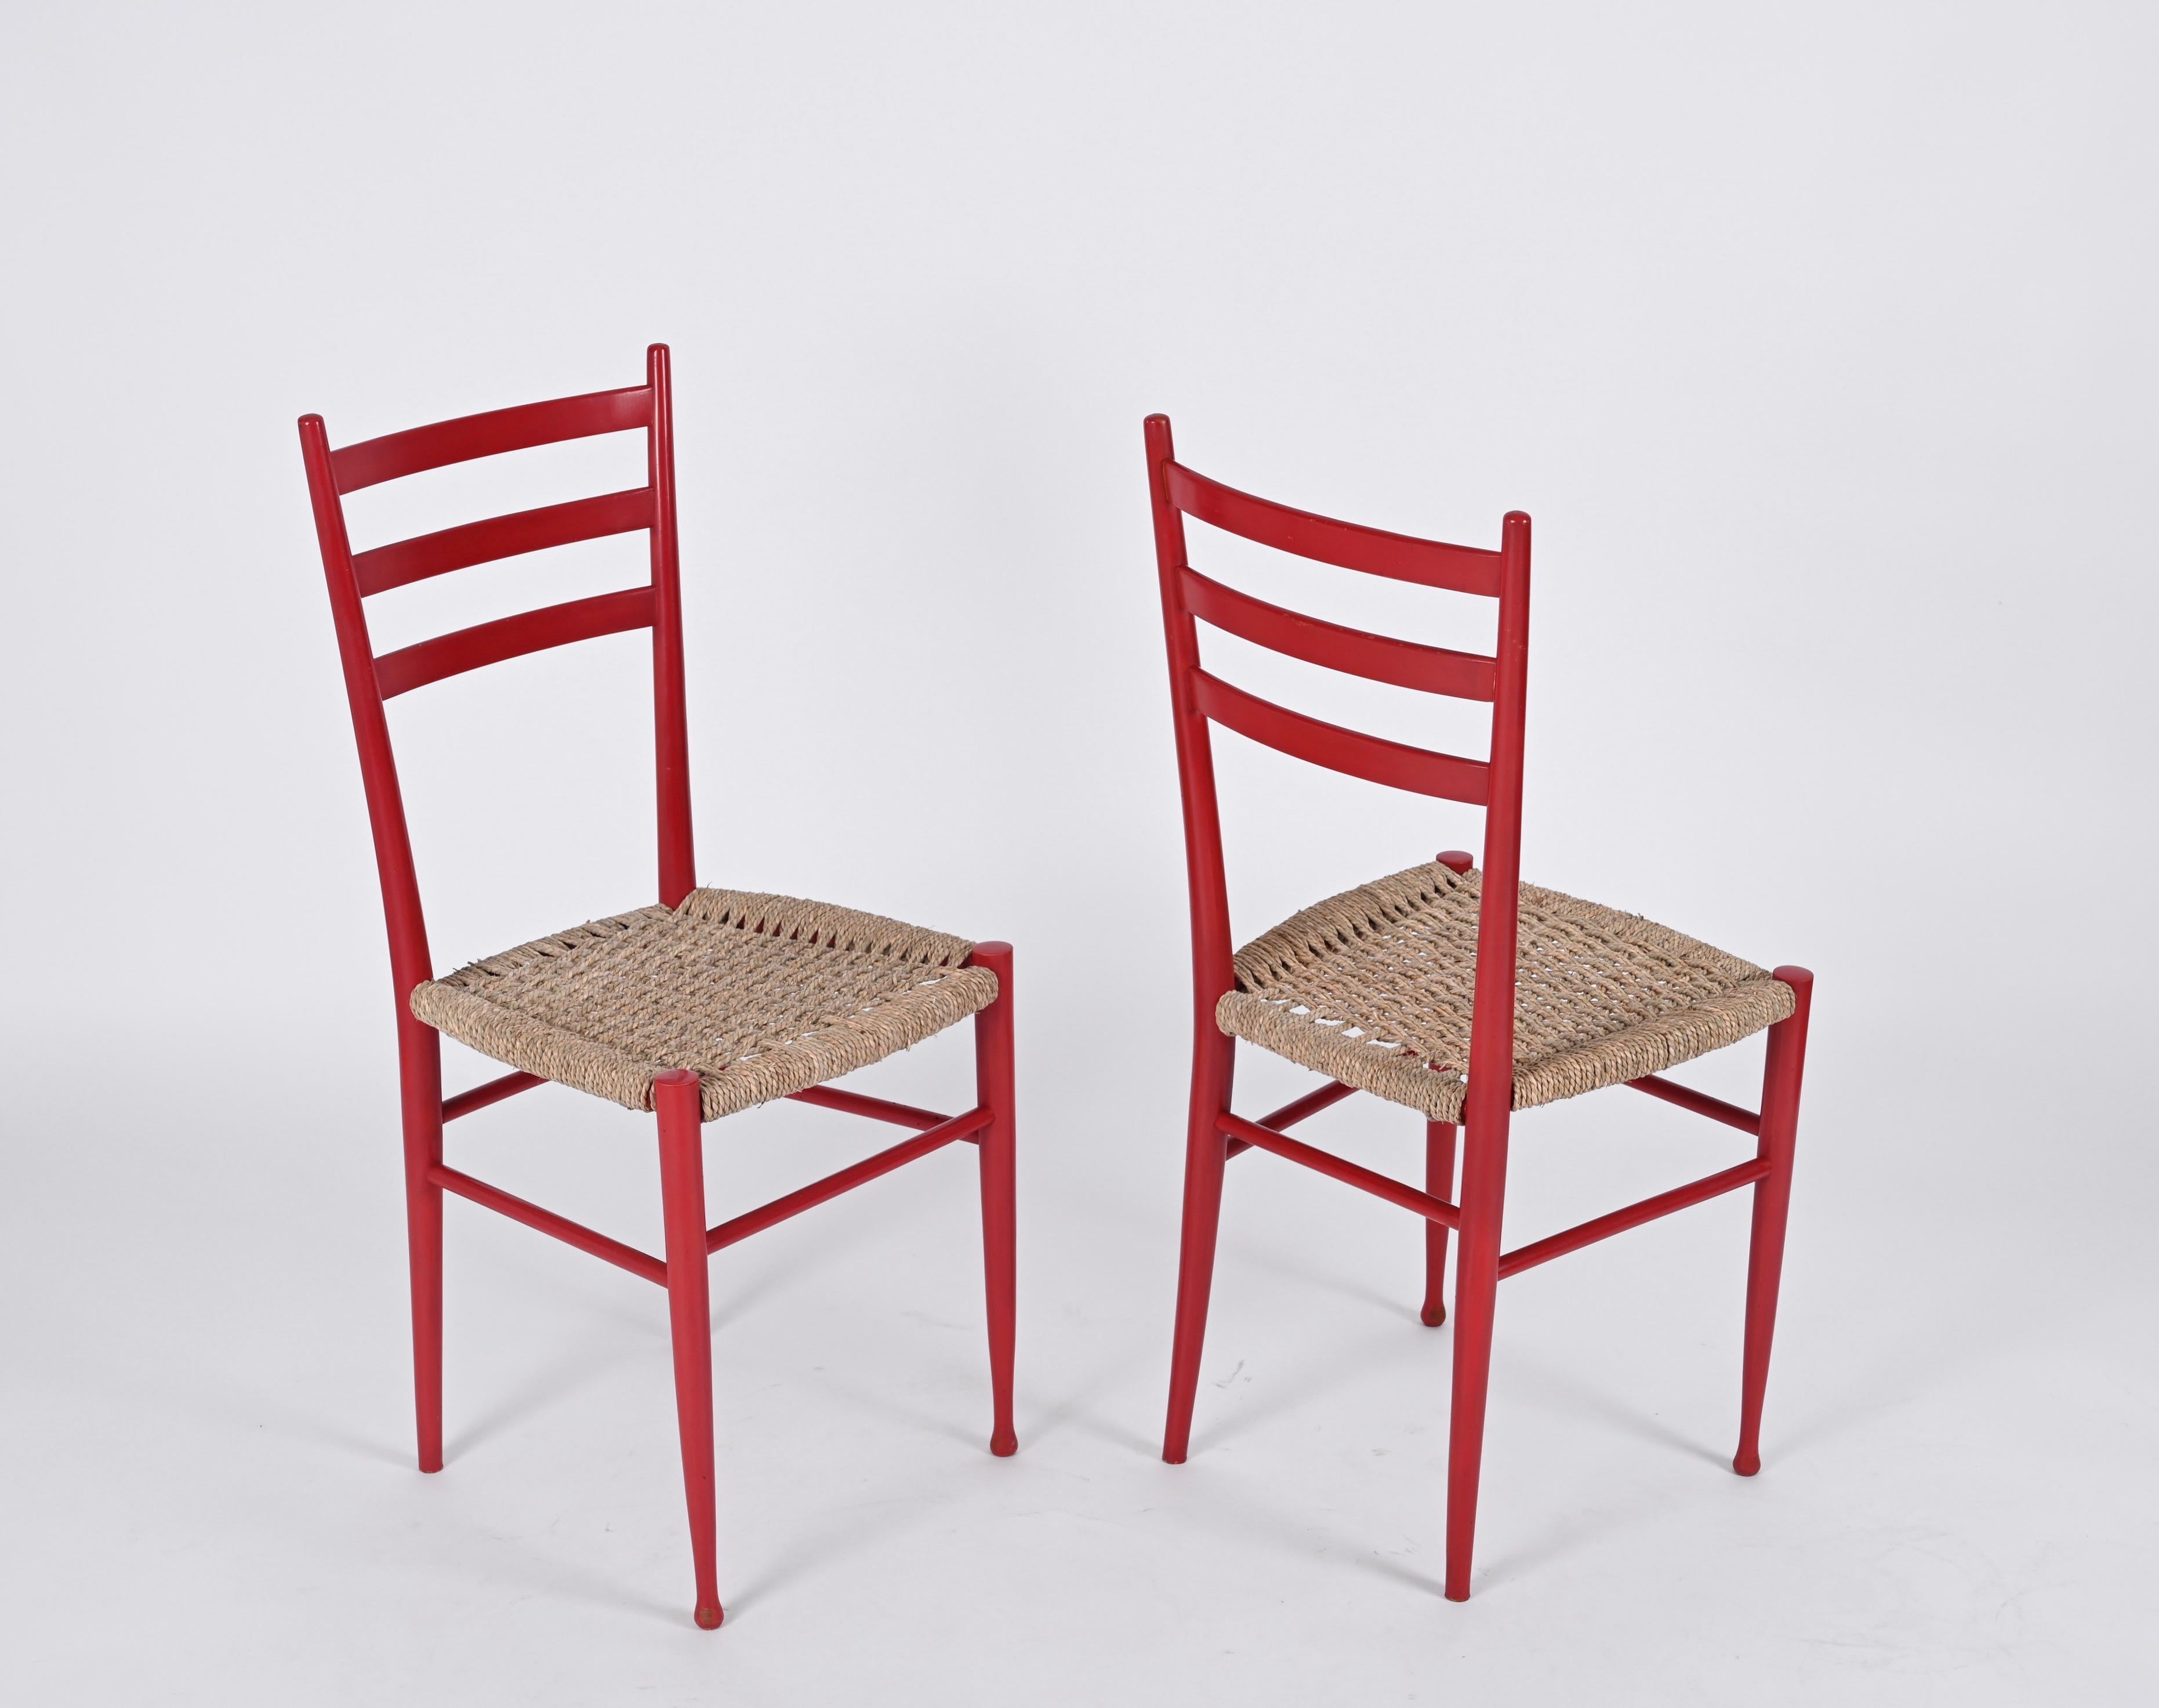 Mid-20th Century Set of 4 Chiavarine Chairs in Red Stained Beech and Bamboo Rope, Italy 1950s For Sale